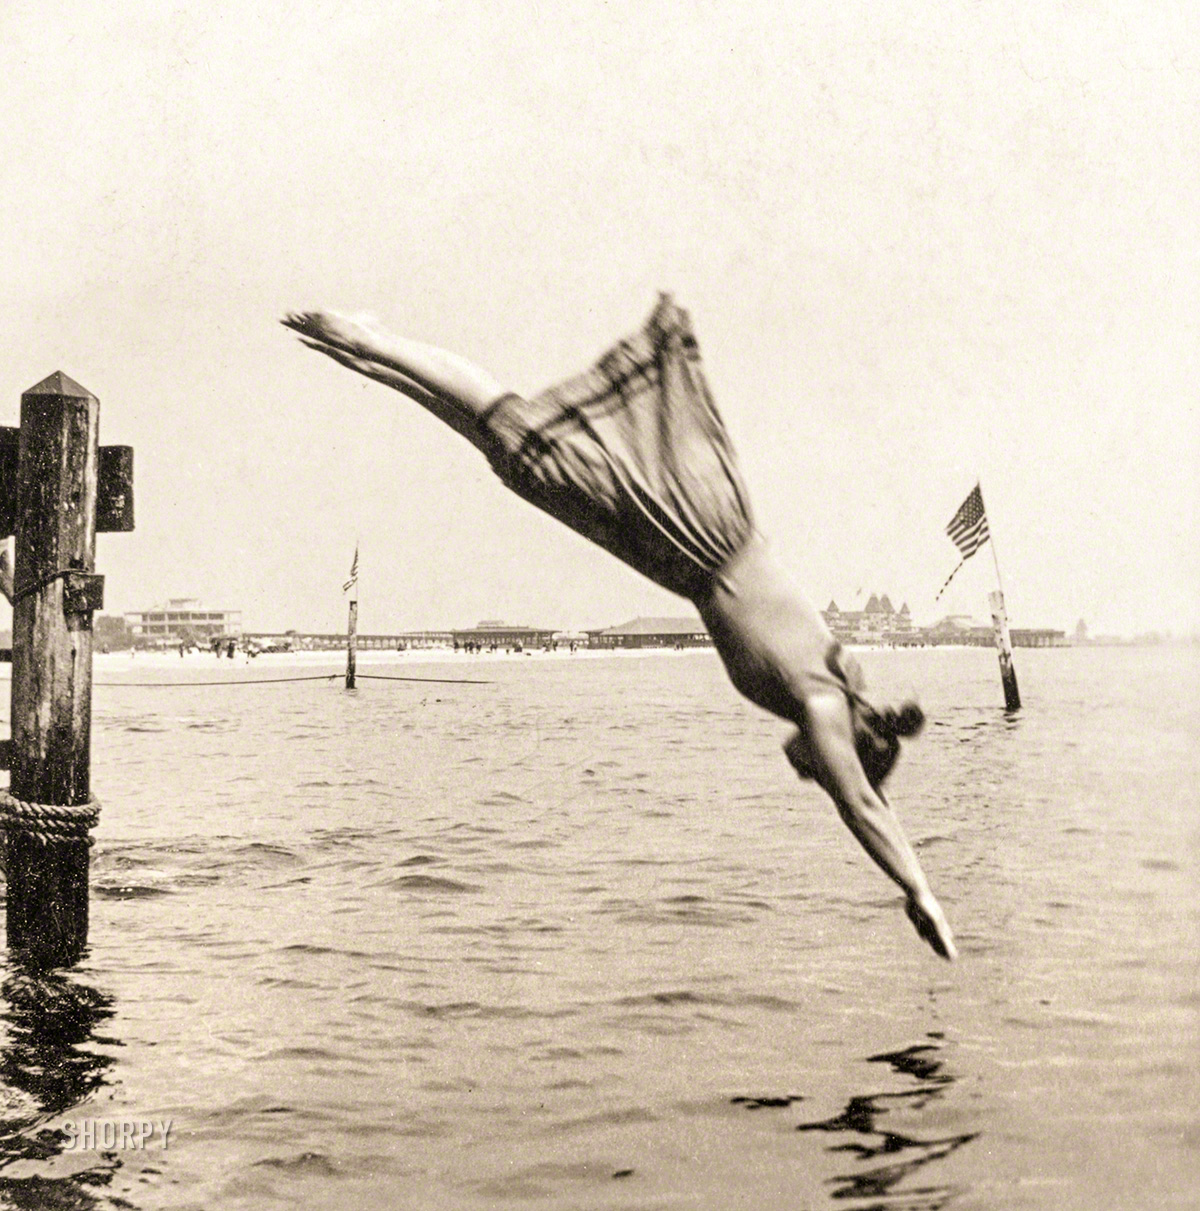 Circa 1892. "Woman diving from pier." Albumen print from "J.S. Johnston's series of American stereoscopic views," 1889-1892. View full size.